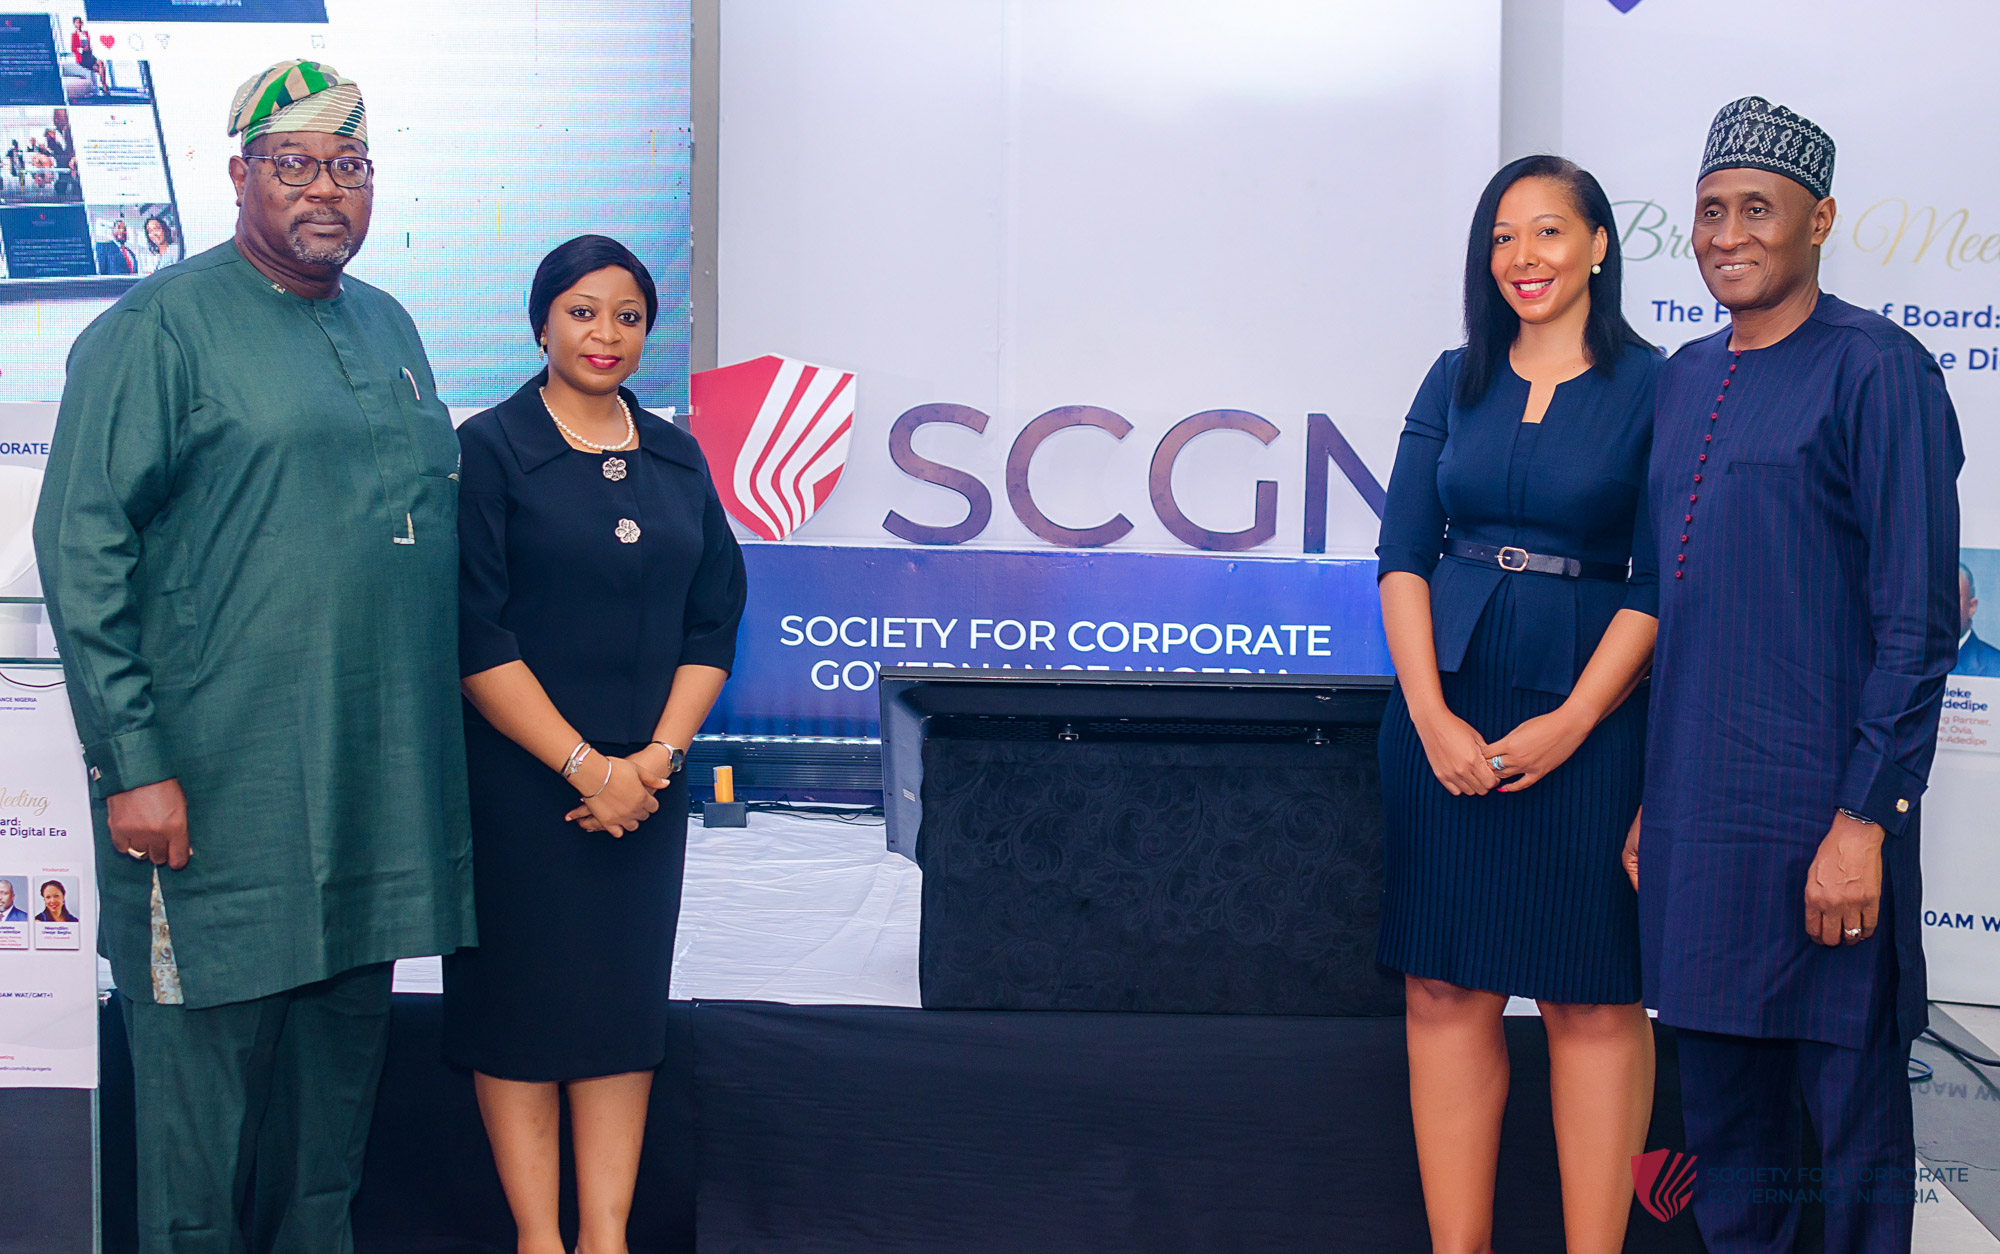 Corporate Governance Indispensable in New World Order – SCGN